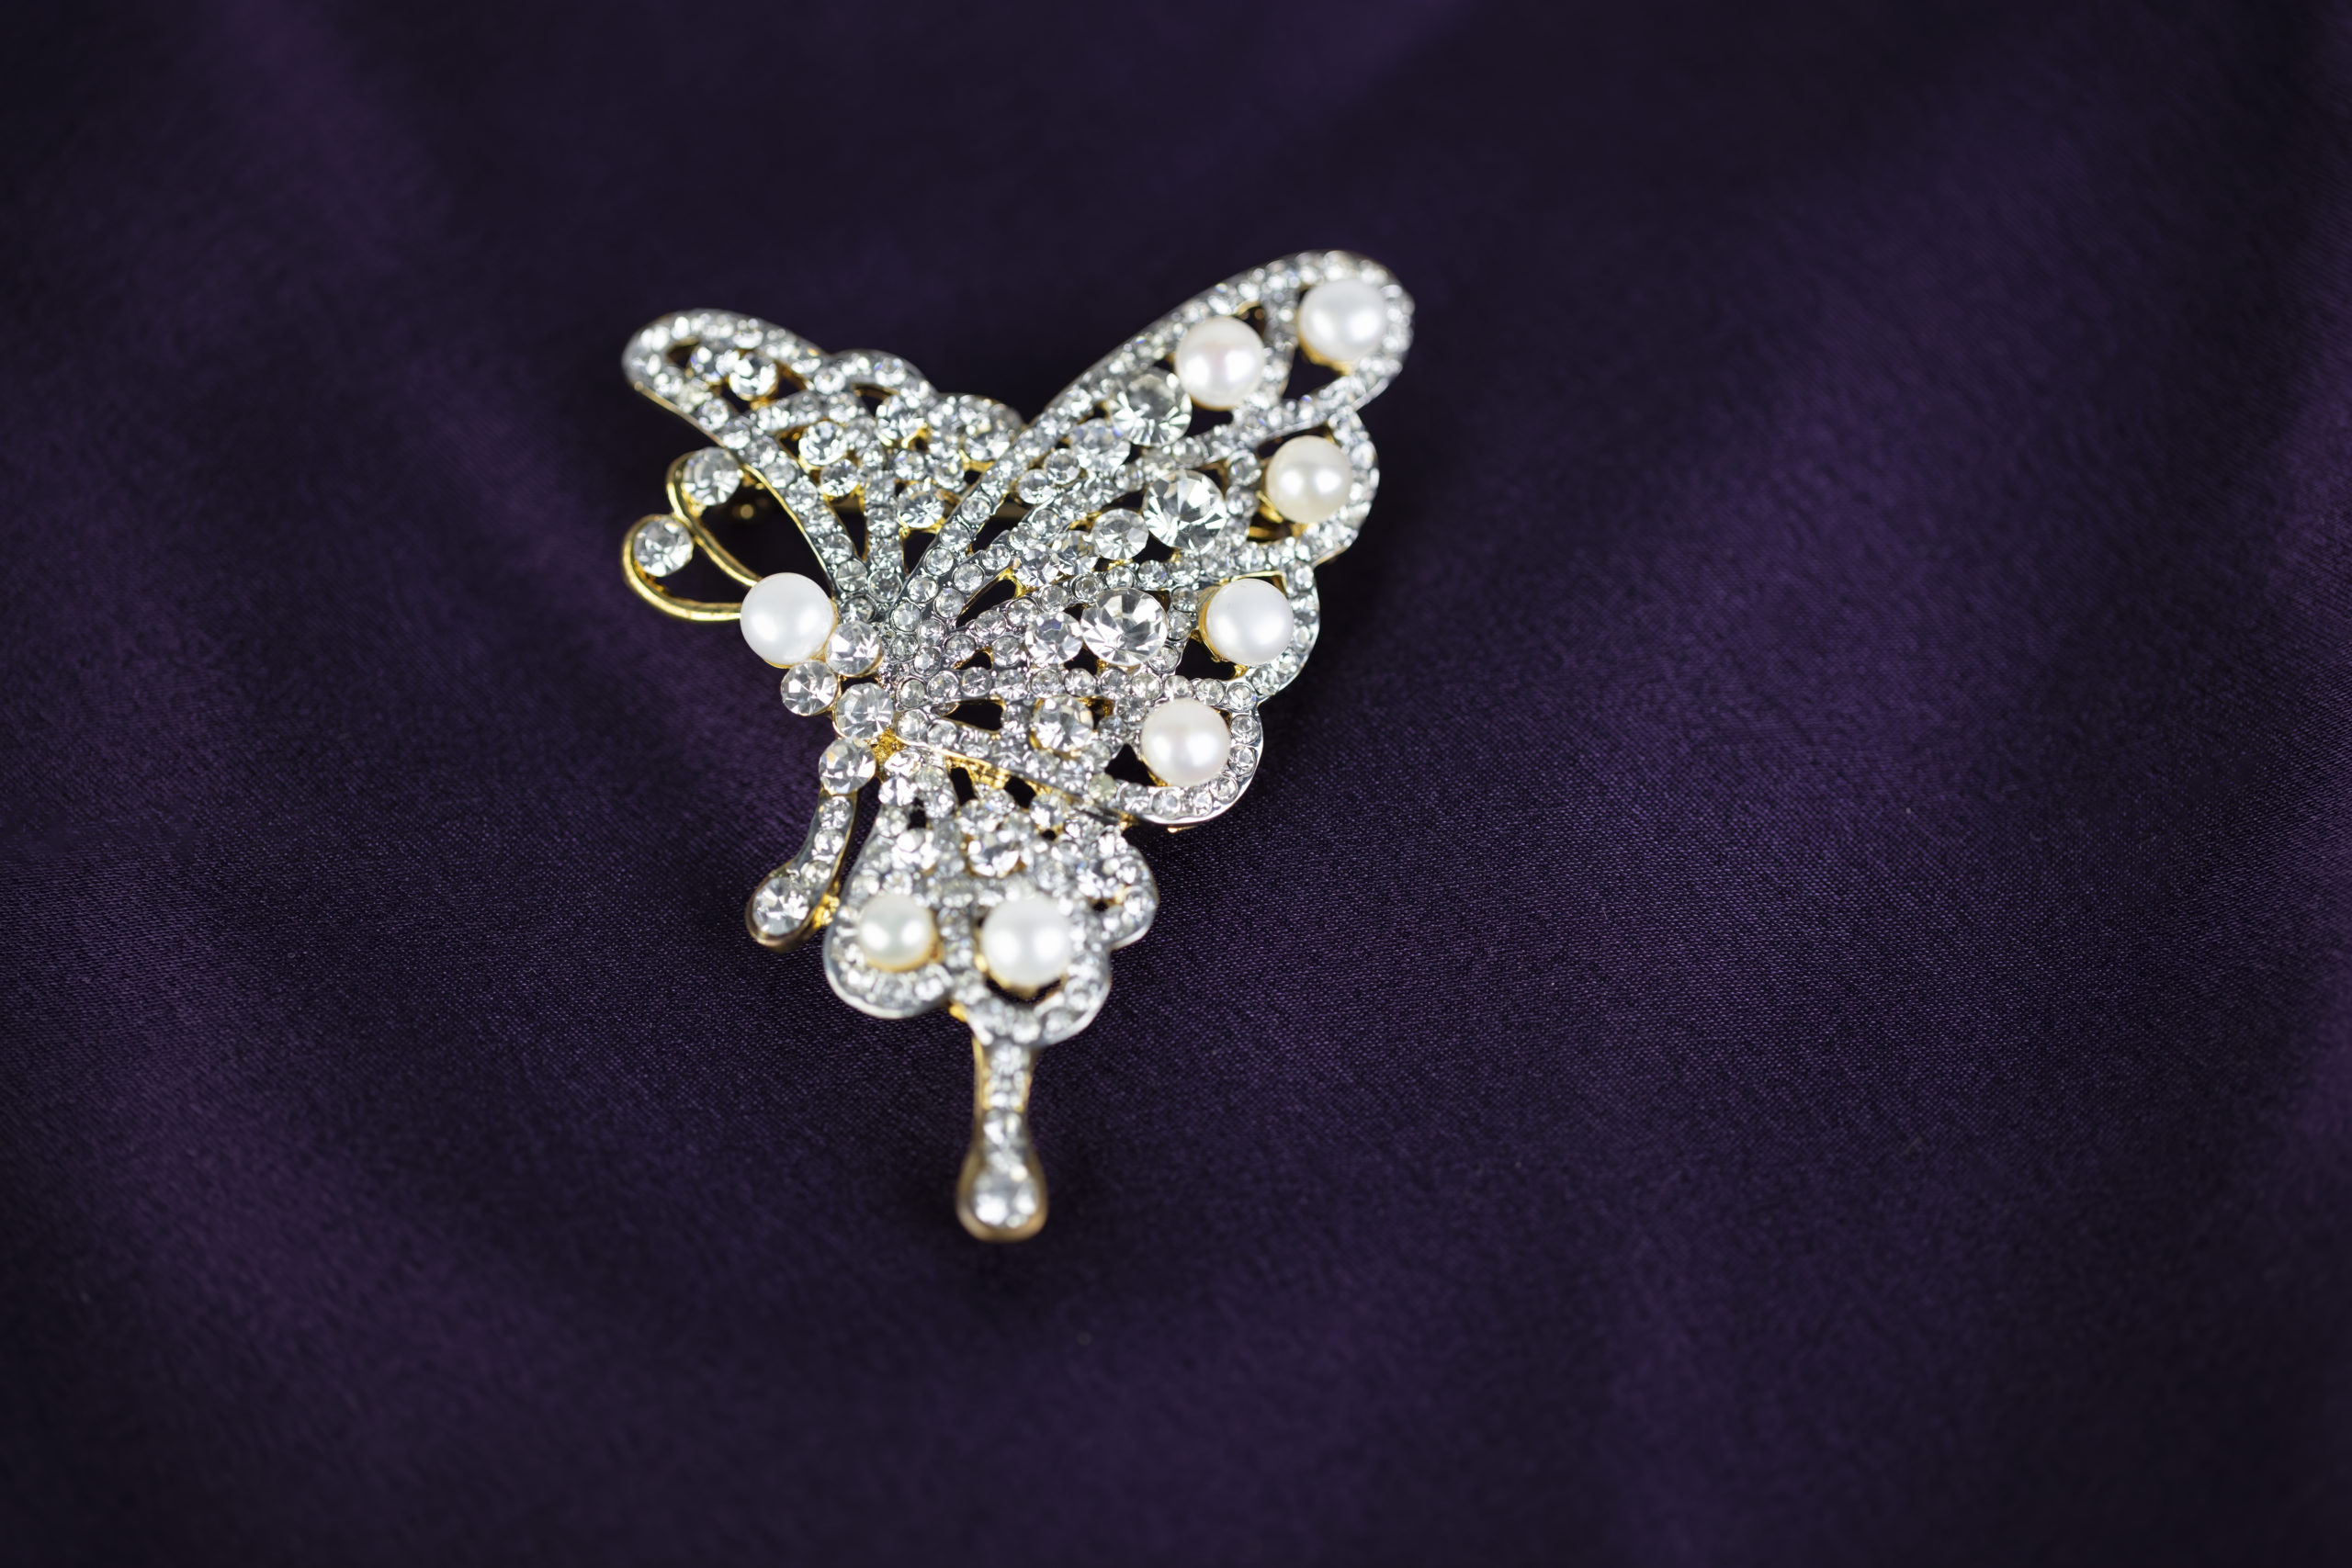 Pearl and diamond brooch in the shape of a butterfly isolated on a dark purple silk background